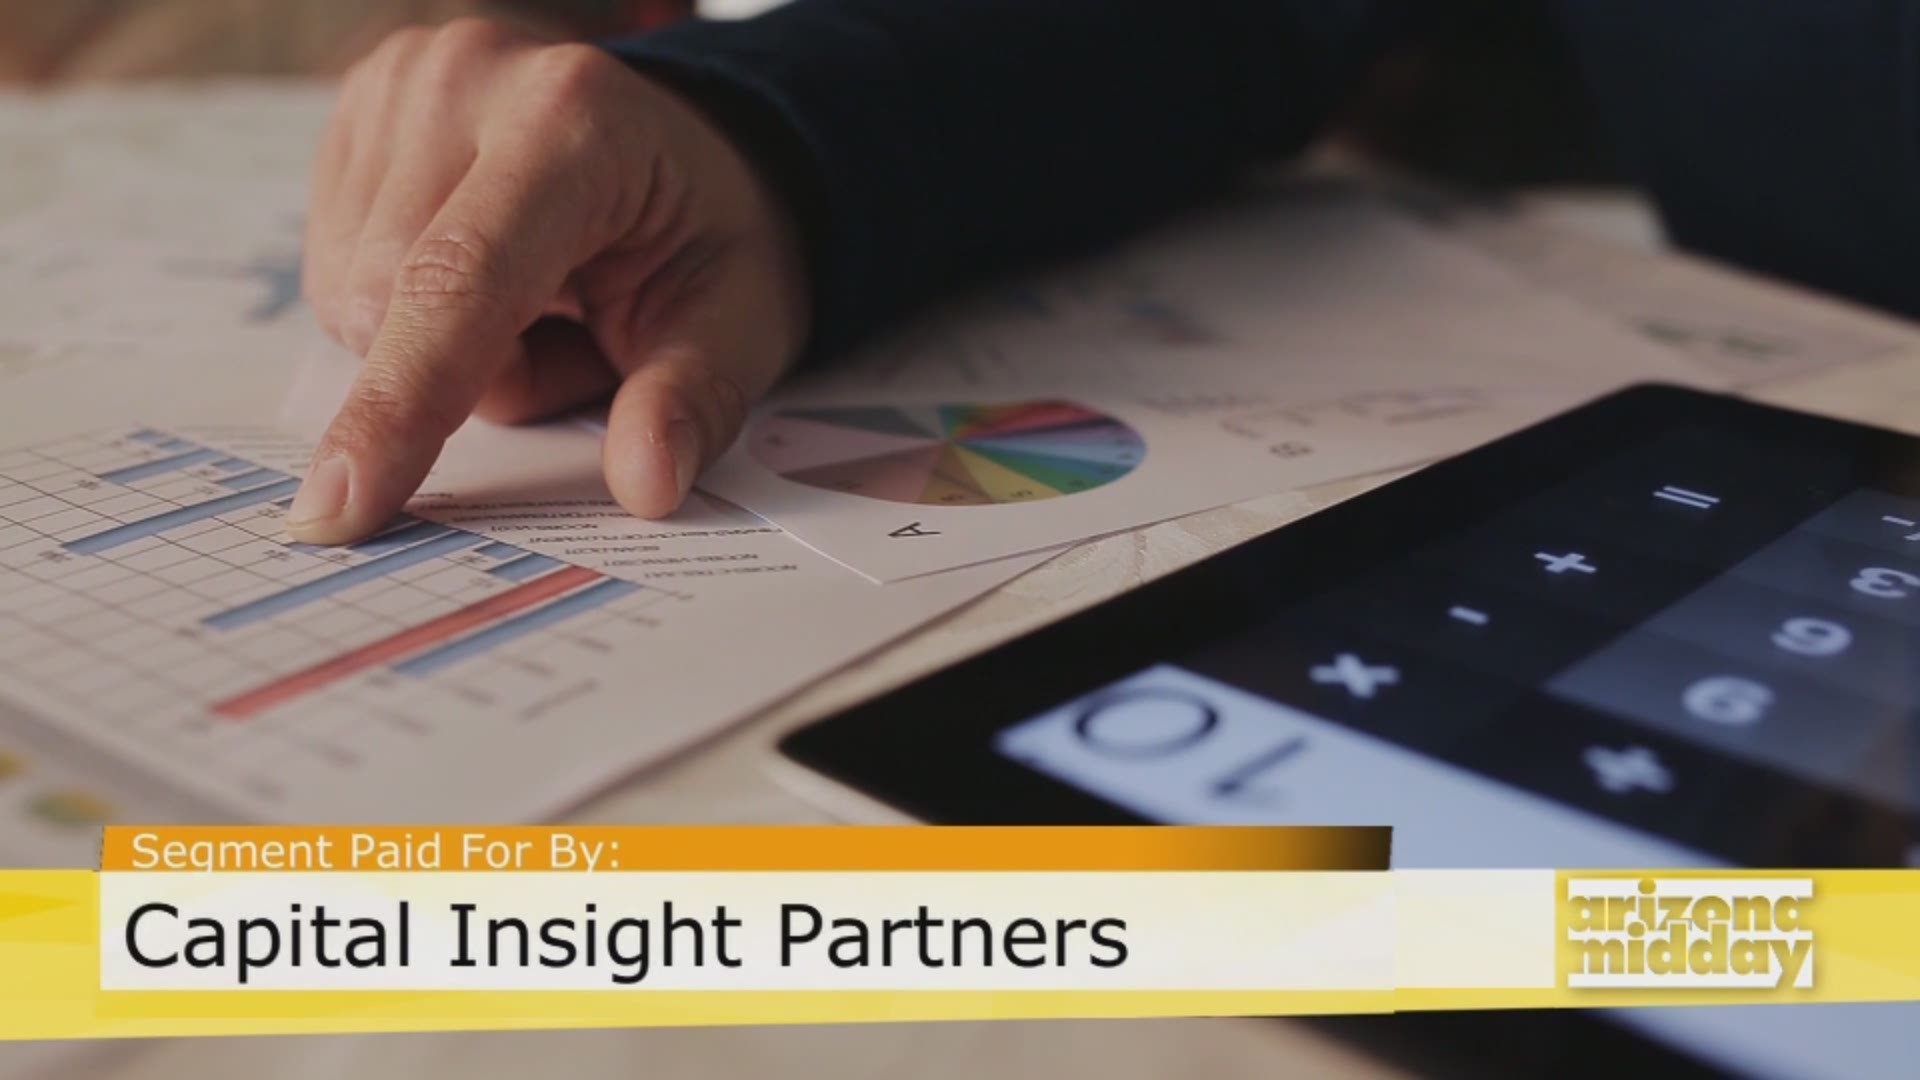 Look ahead to investing in 2021. Steve Nelson, CEO of Capital Insight Partners, shares how his company can help you.